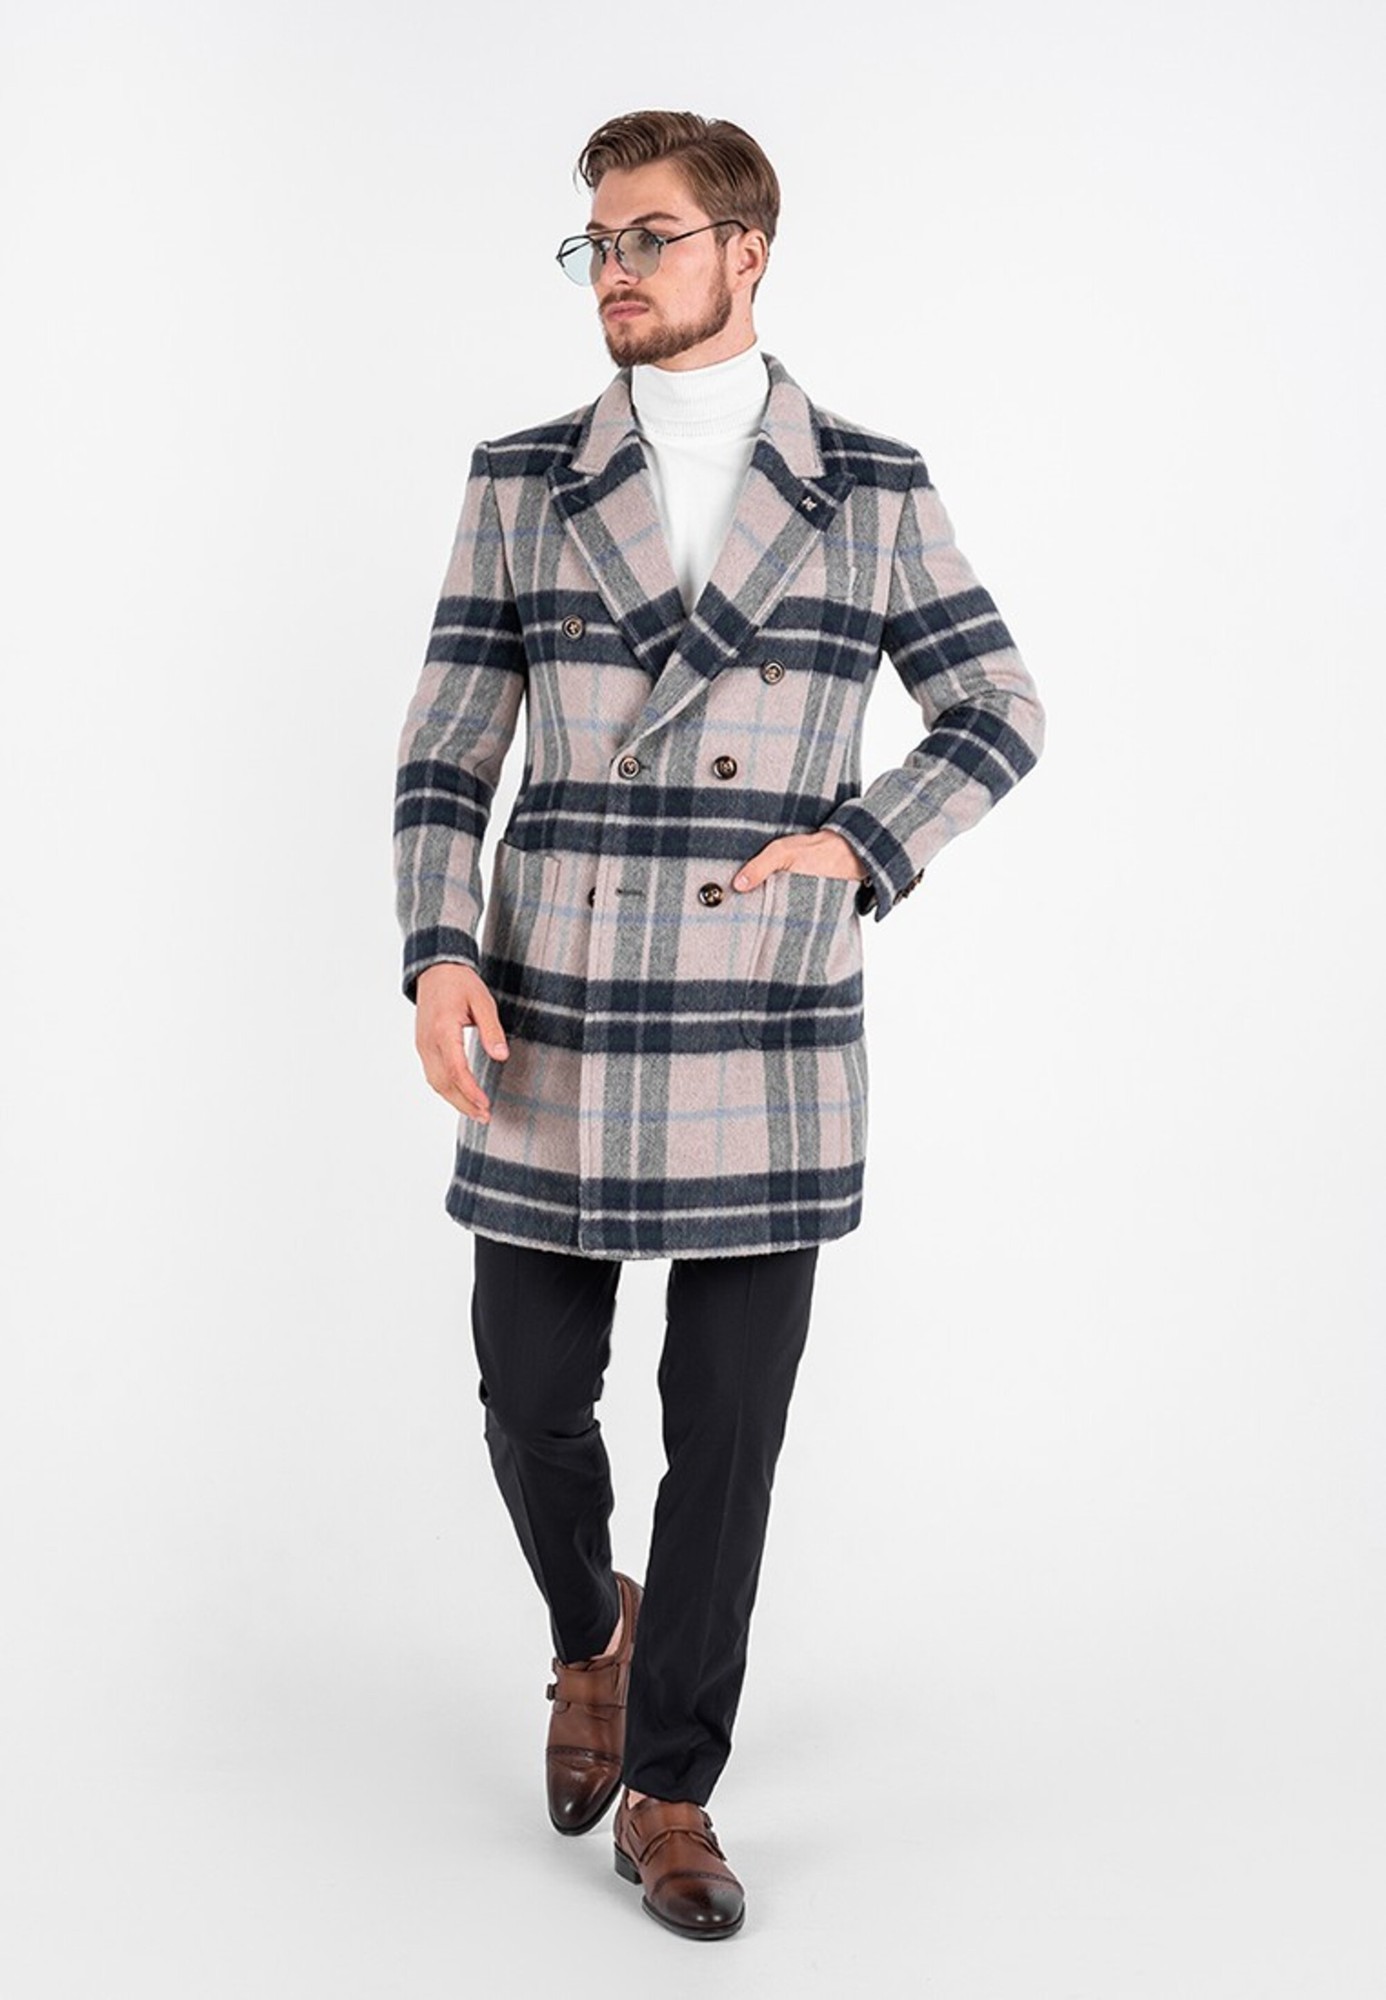 A checkered wool coat is blue